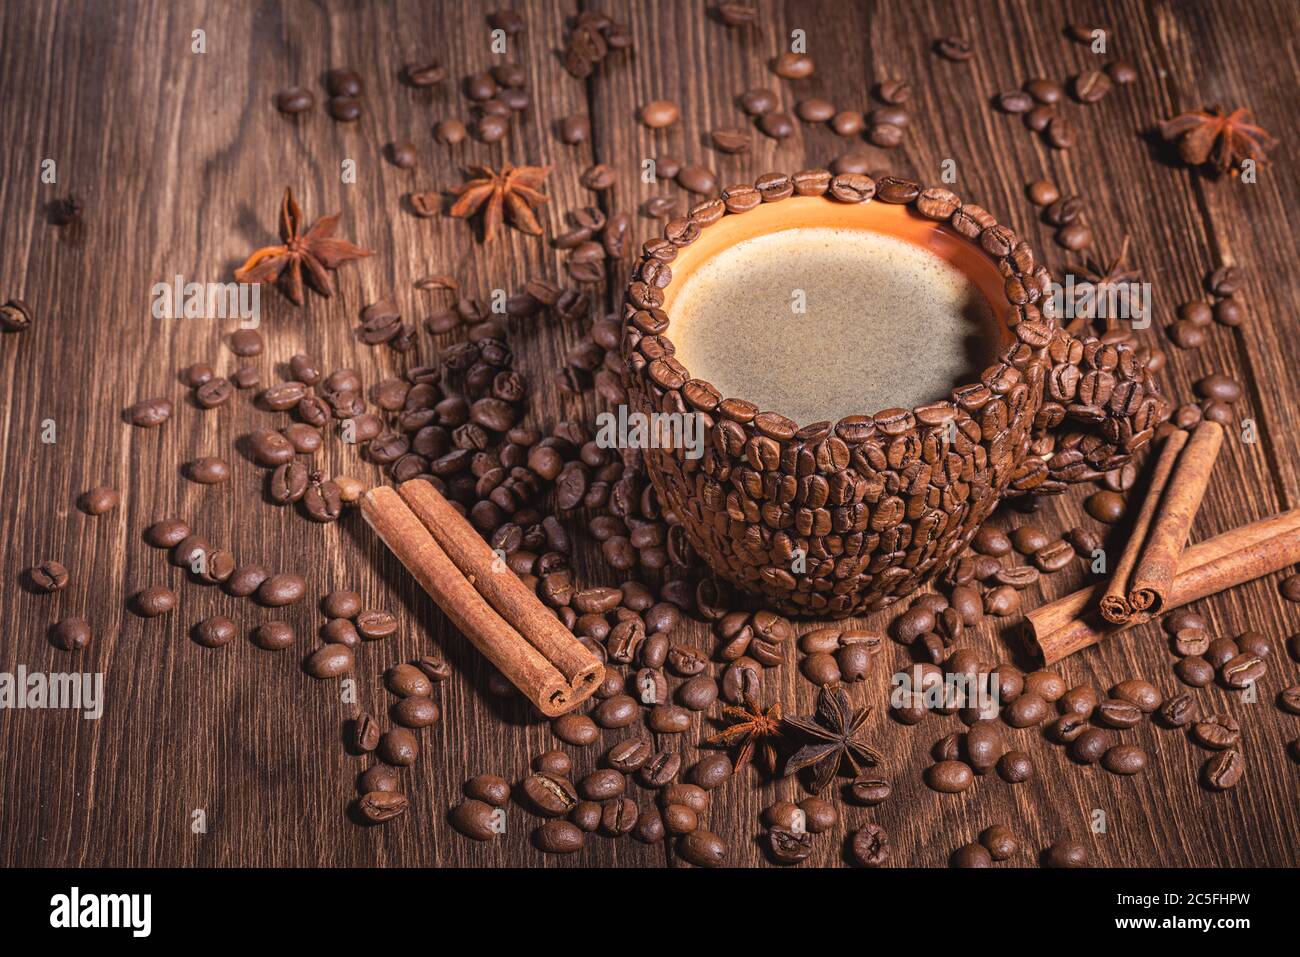 Coffee cup with coffee made from coffee beans wooden table Copy space. Coffee Cup Table Wood Grain coffee Side view Cinnamon stick. Stock Photo